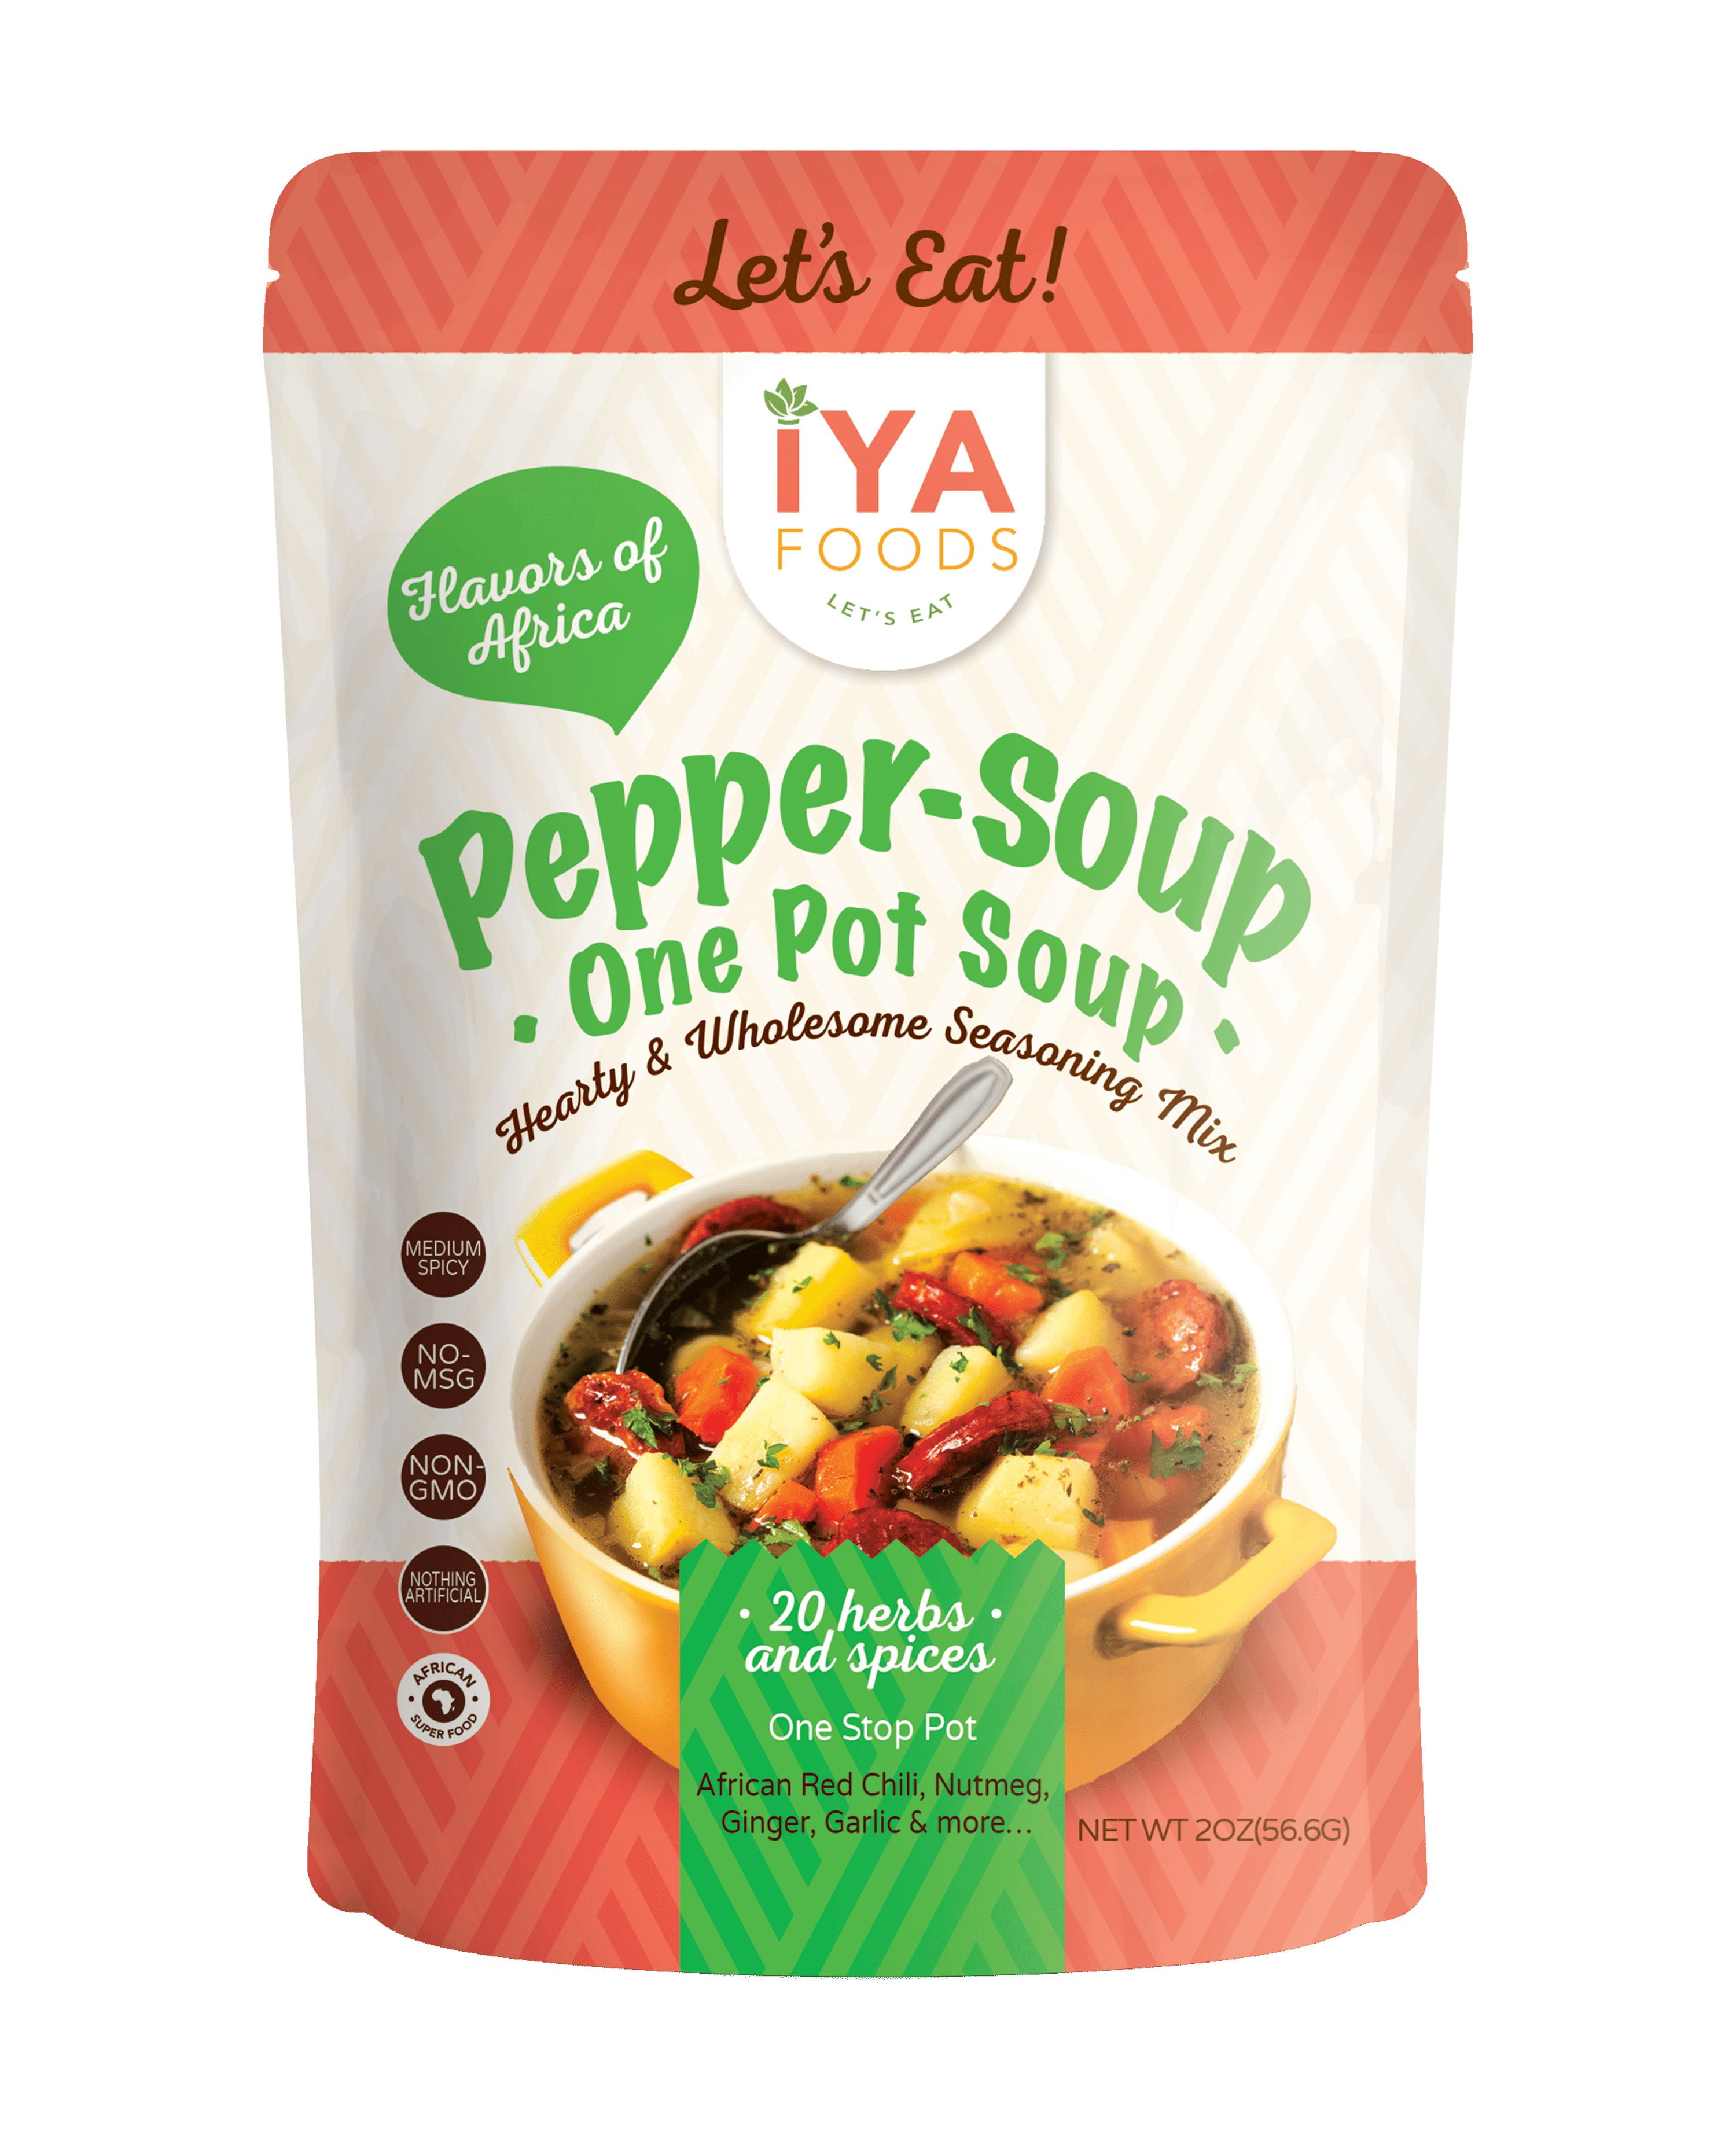 USimplySeason Pepper Soup Spice (4.8 oz) - African-Inspired Seasoning Blend  - Vegan, Non-GMO, All-Natural - Ideal for Soups, Stews, Made in USA